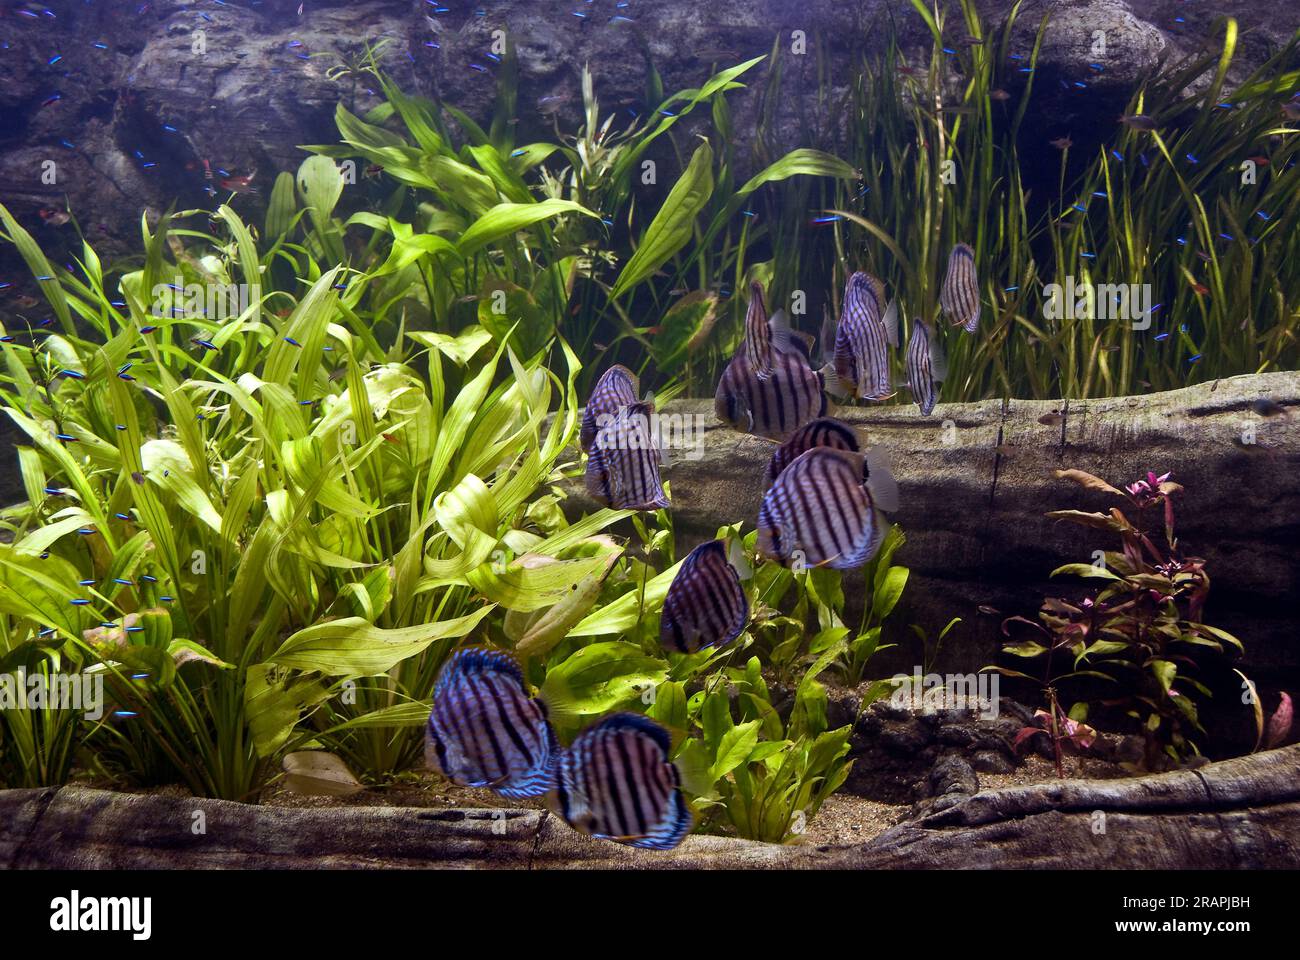 Large freshwater aquarium from the Amazon biotop with large group of Discus (Symphysodon aequifasciatus). Stock Photo